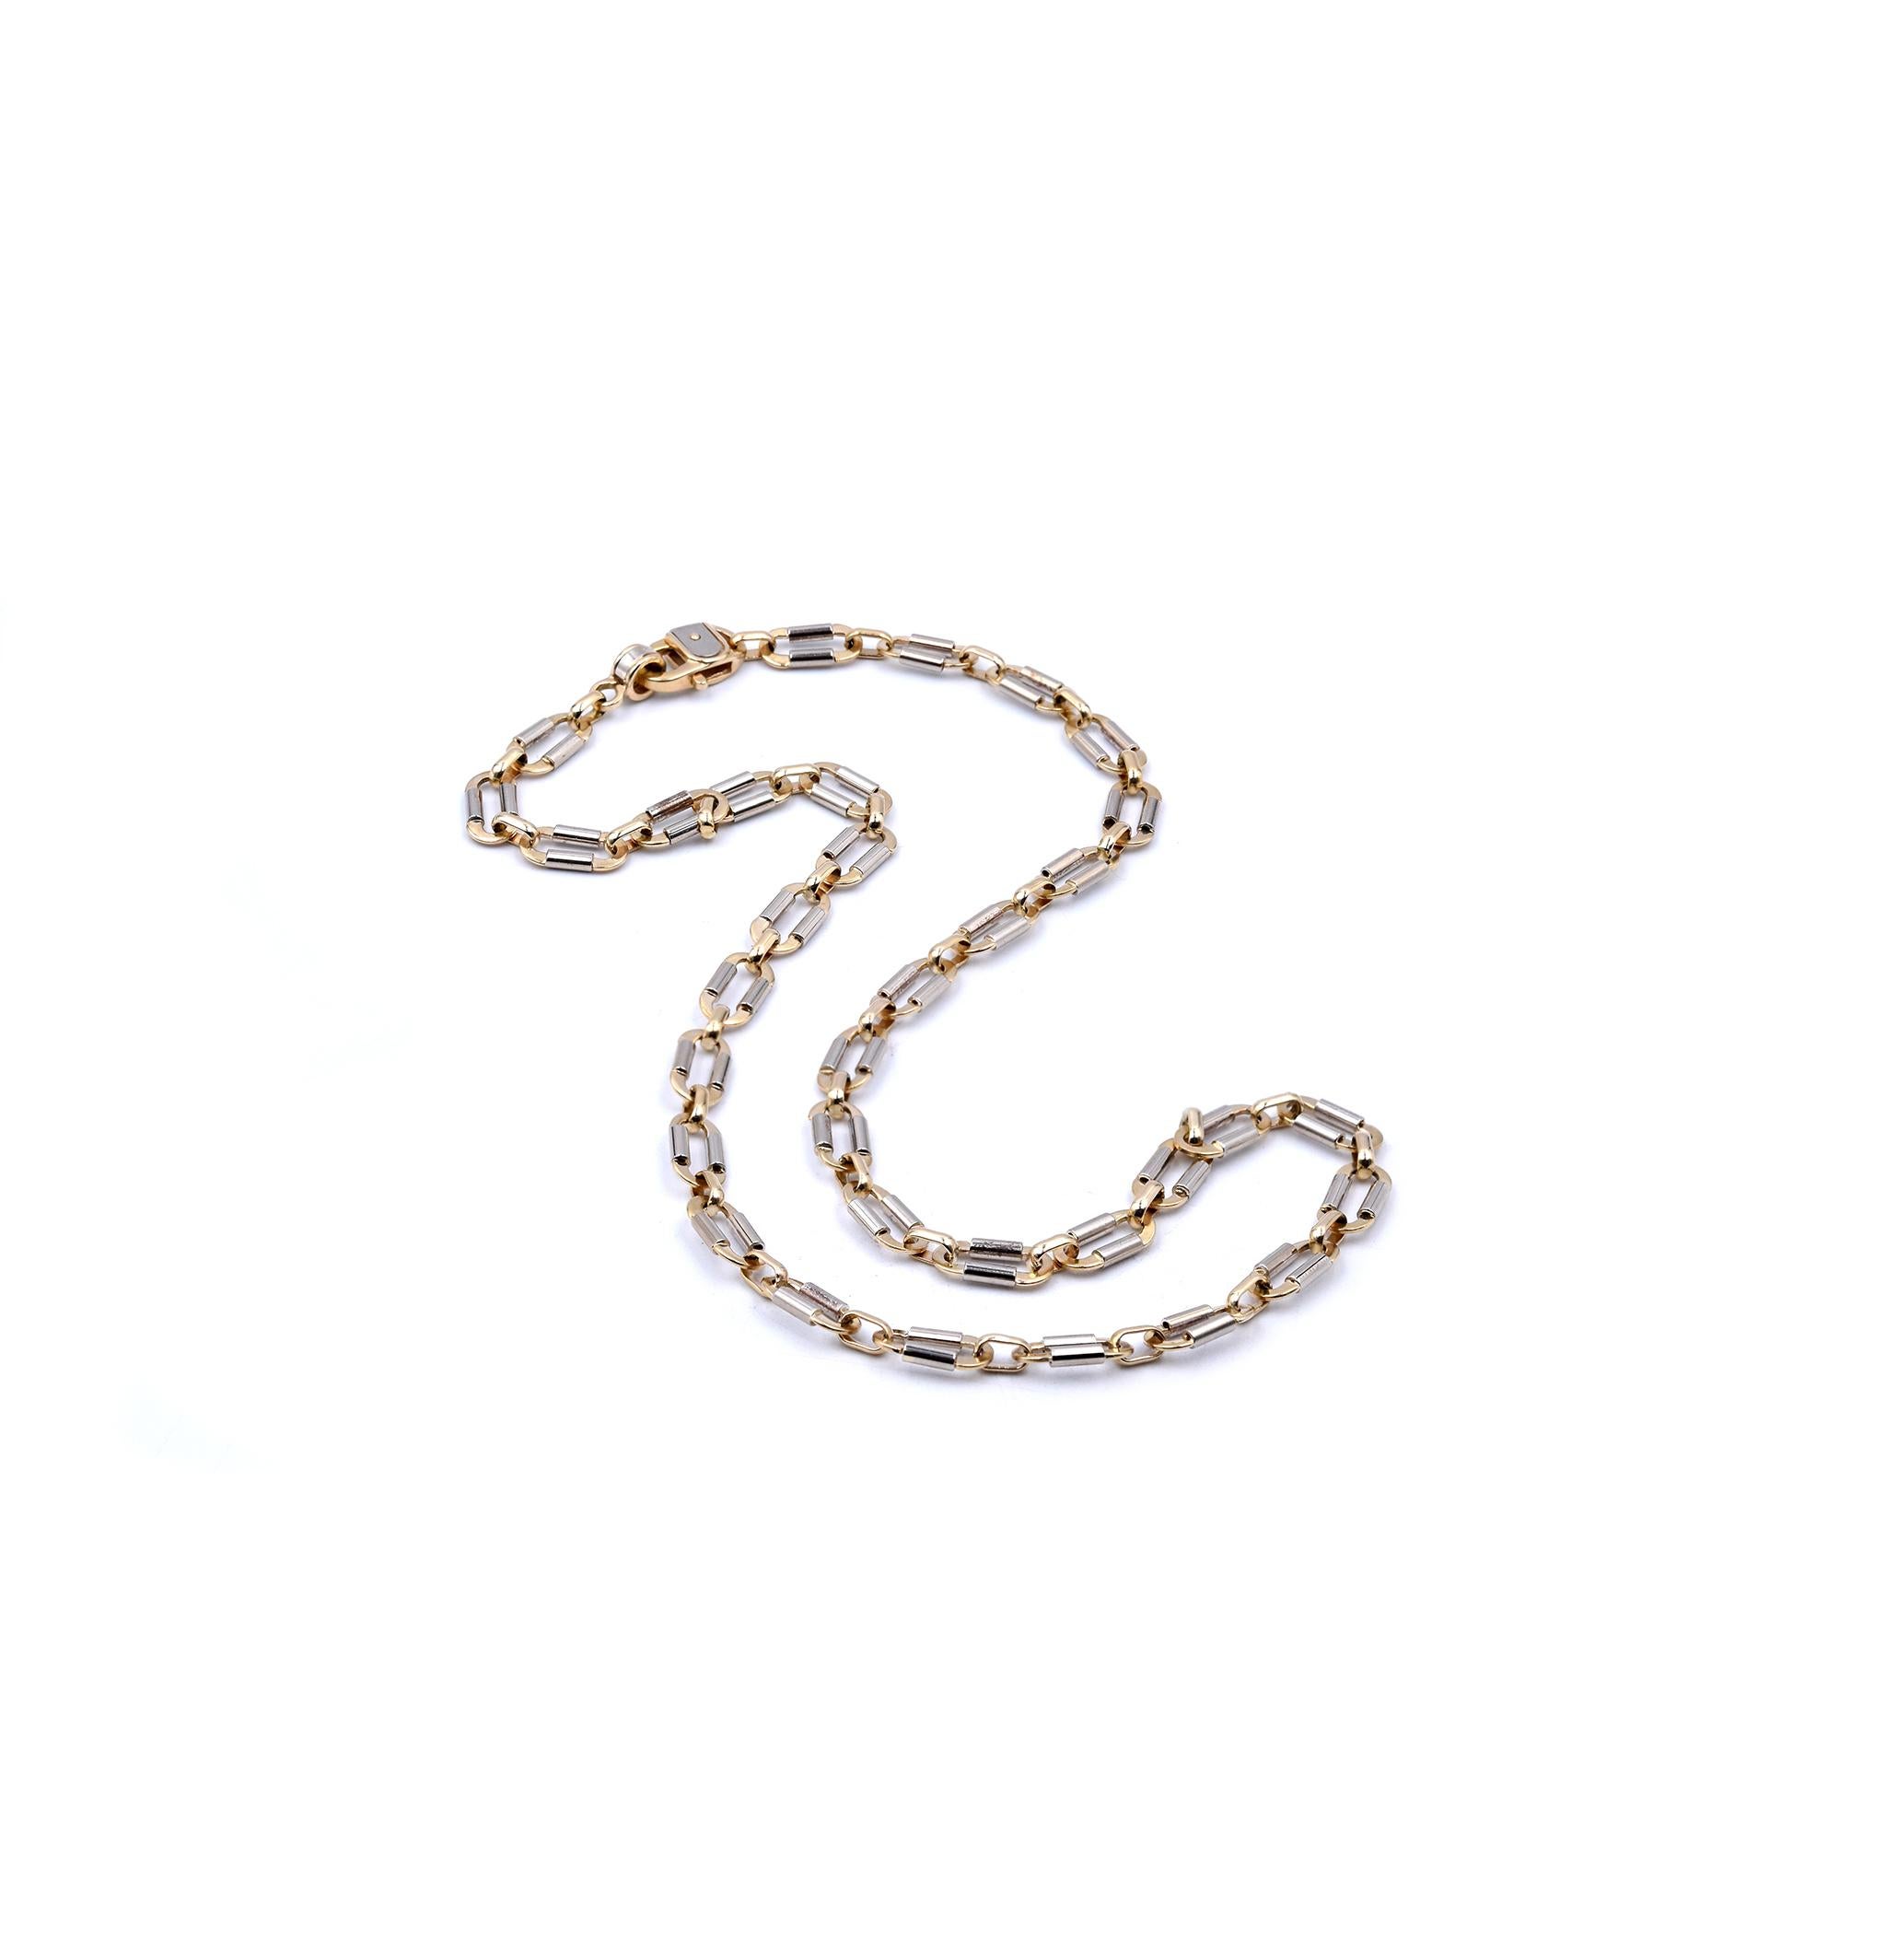 Designer: custom
Material: 14K yellow and white gold
Weight: 27.68 grams
Measurement: necklace measures 20-inches
